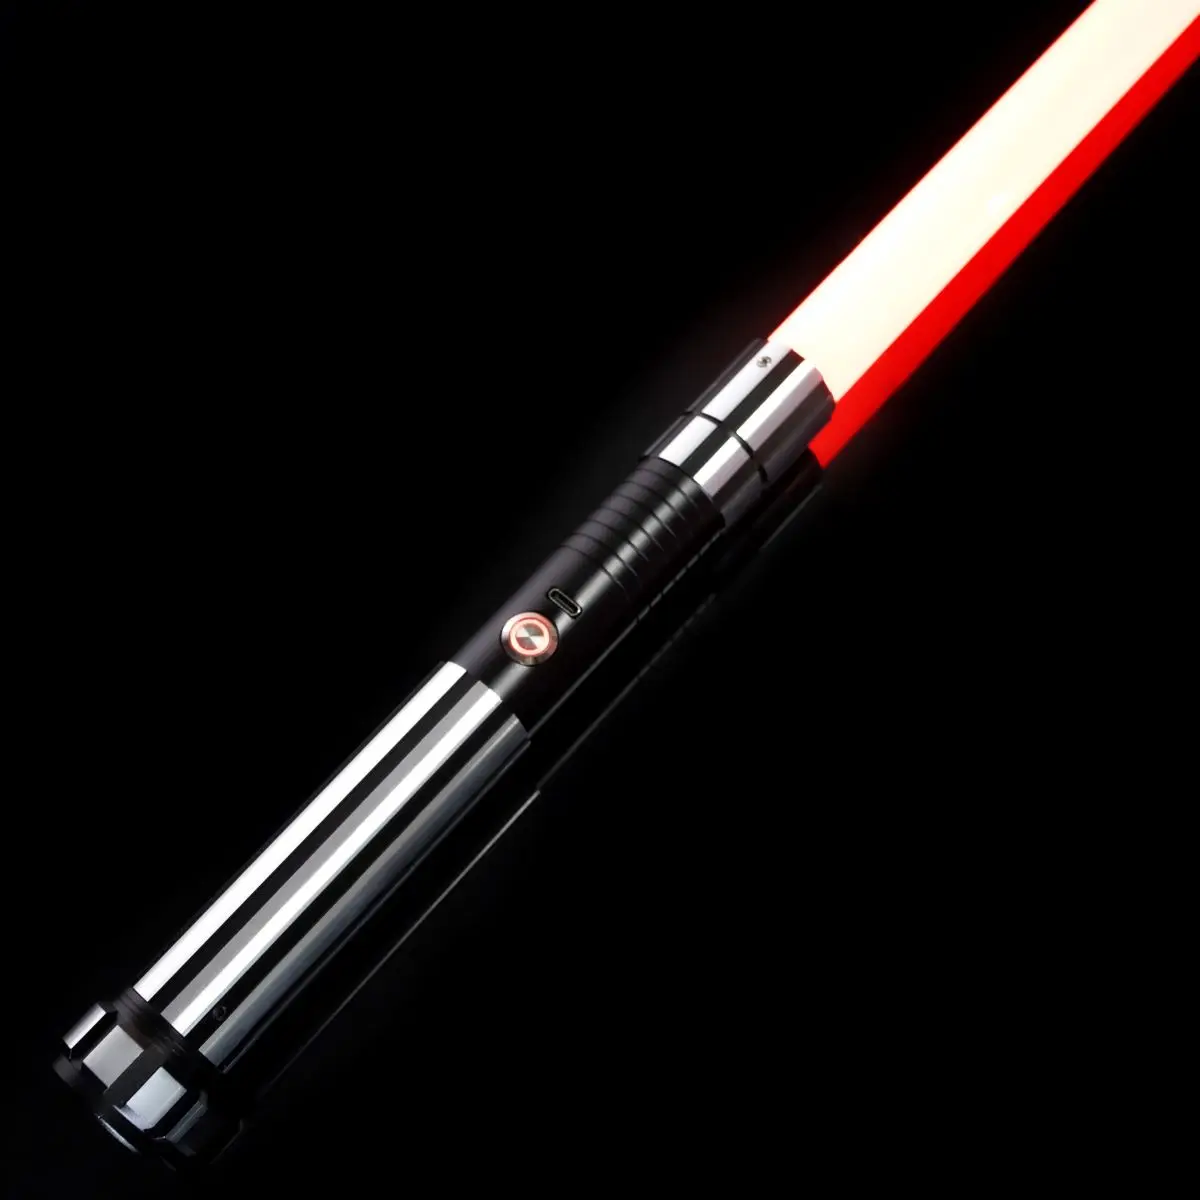 

DamienSaber Heavy Dueling Lightsaber Smooth Swing Xeno3.0 Pixel Light Sabers Metal Handle with Infinite Color Changing Bluetooth